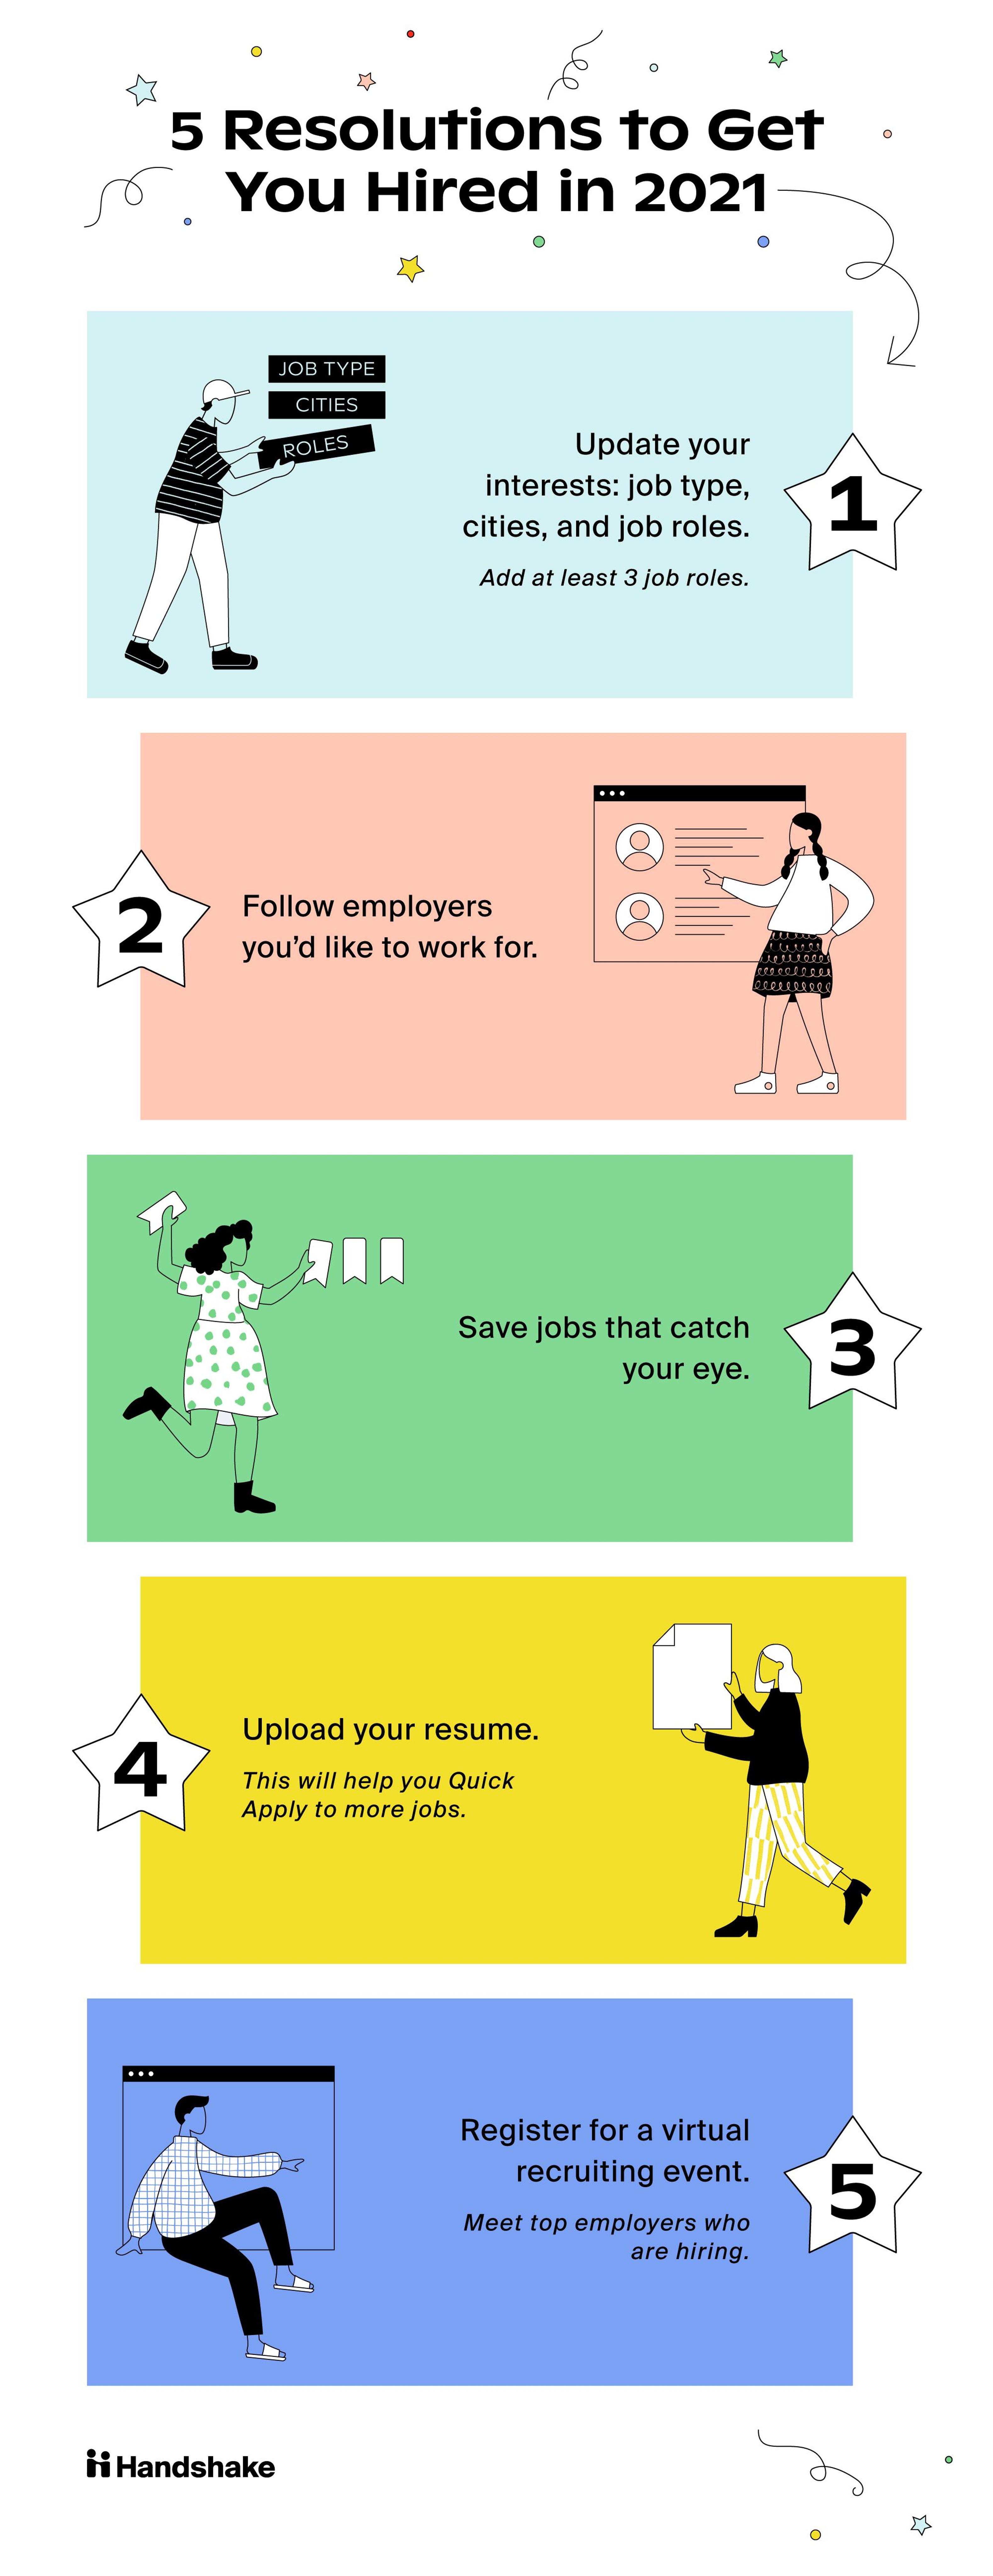 5 resolutions to get hired in 2021